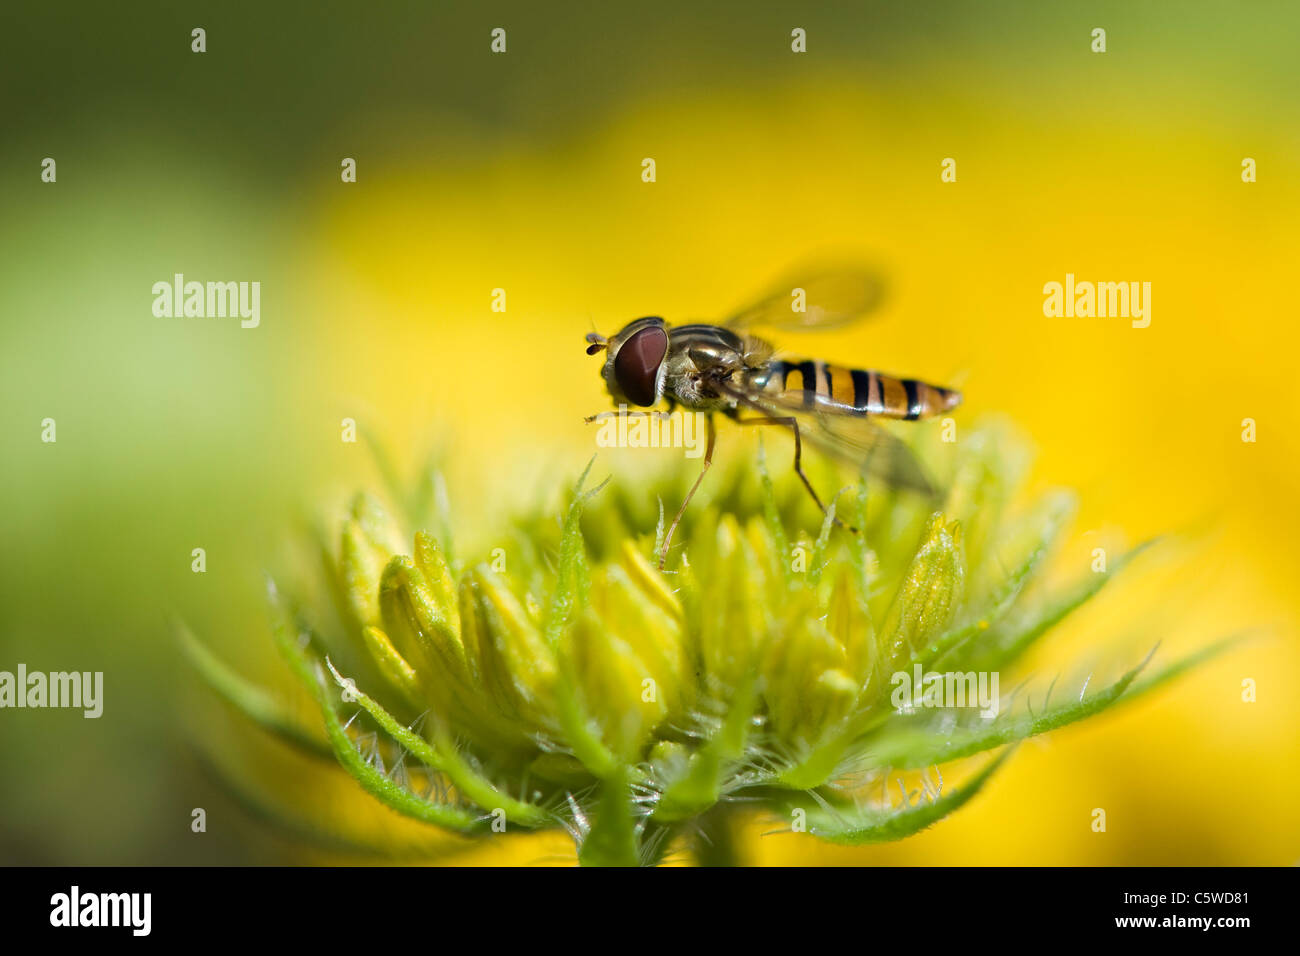 A Hoverfly, flower fly or syrphid fly on a Blanket flower bud Stock Photo